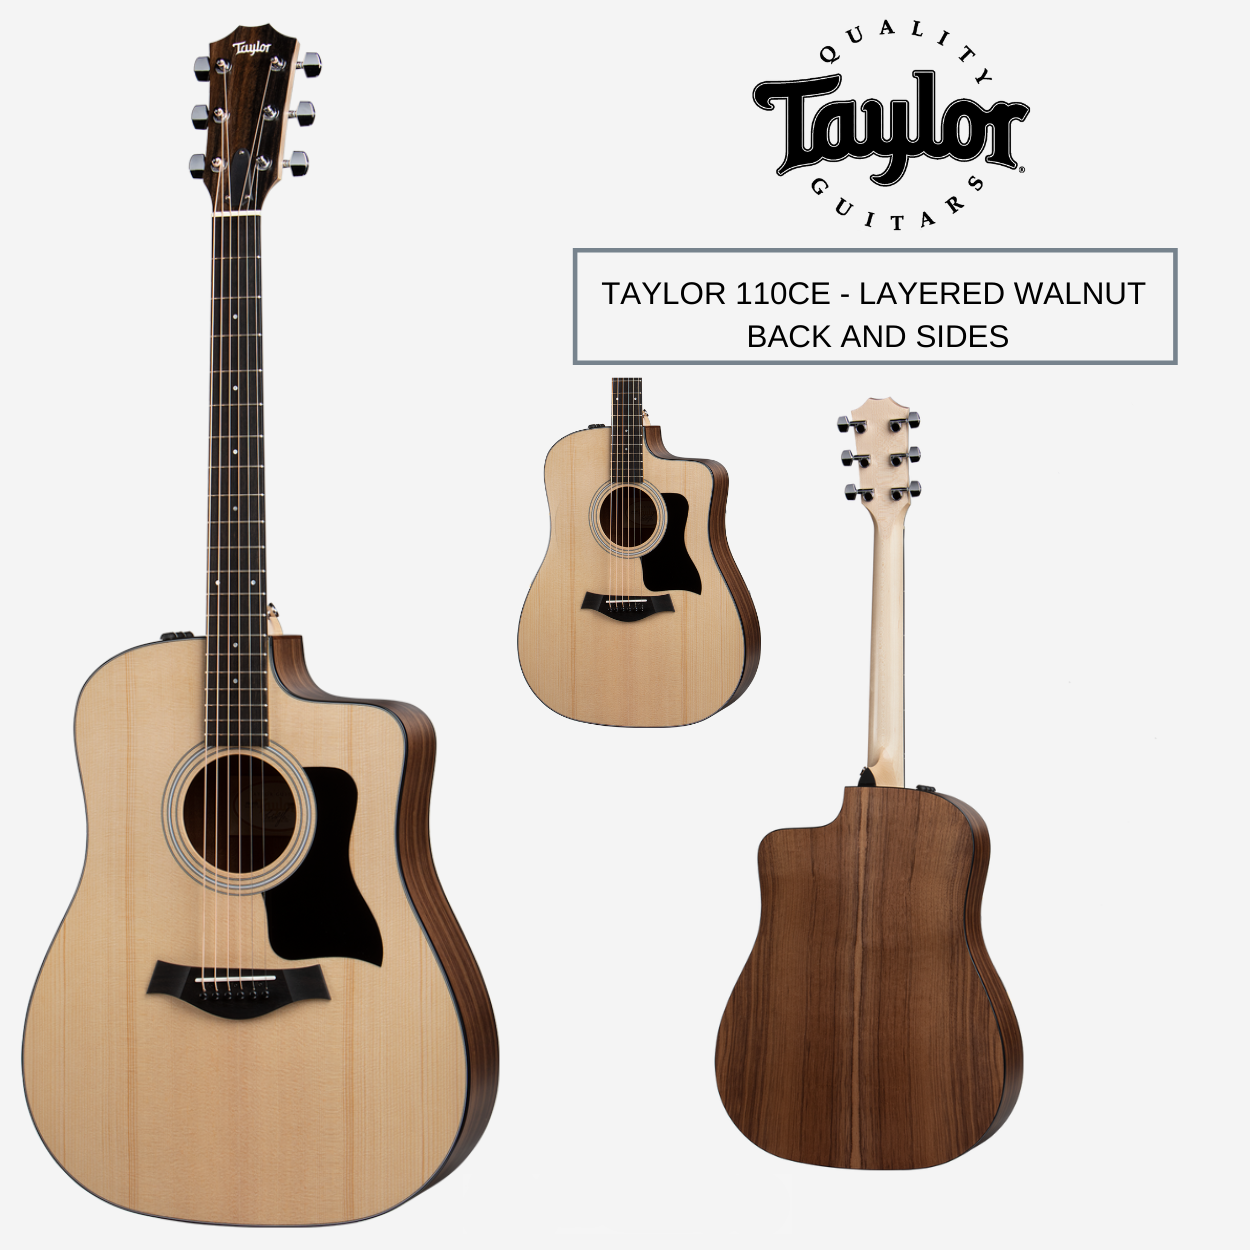 Taylor 110CE - Layered Walnut Back And Sides Dreadnought - Cutaway Electro Acoustic Guitar